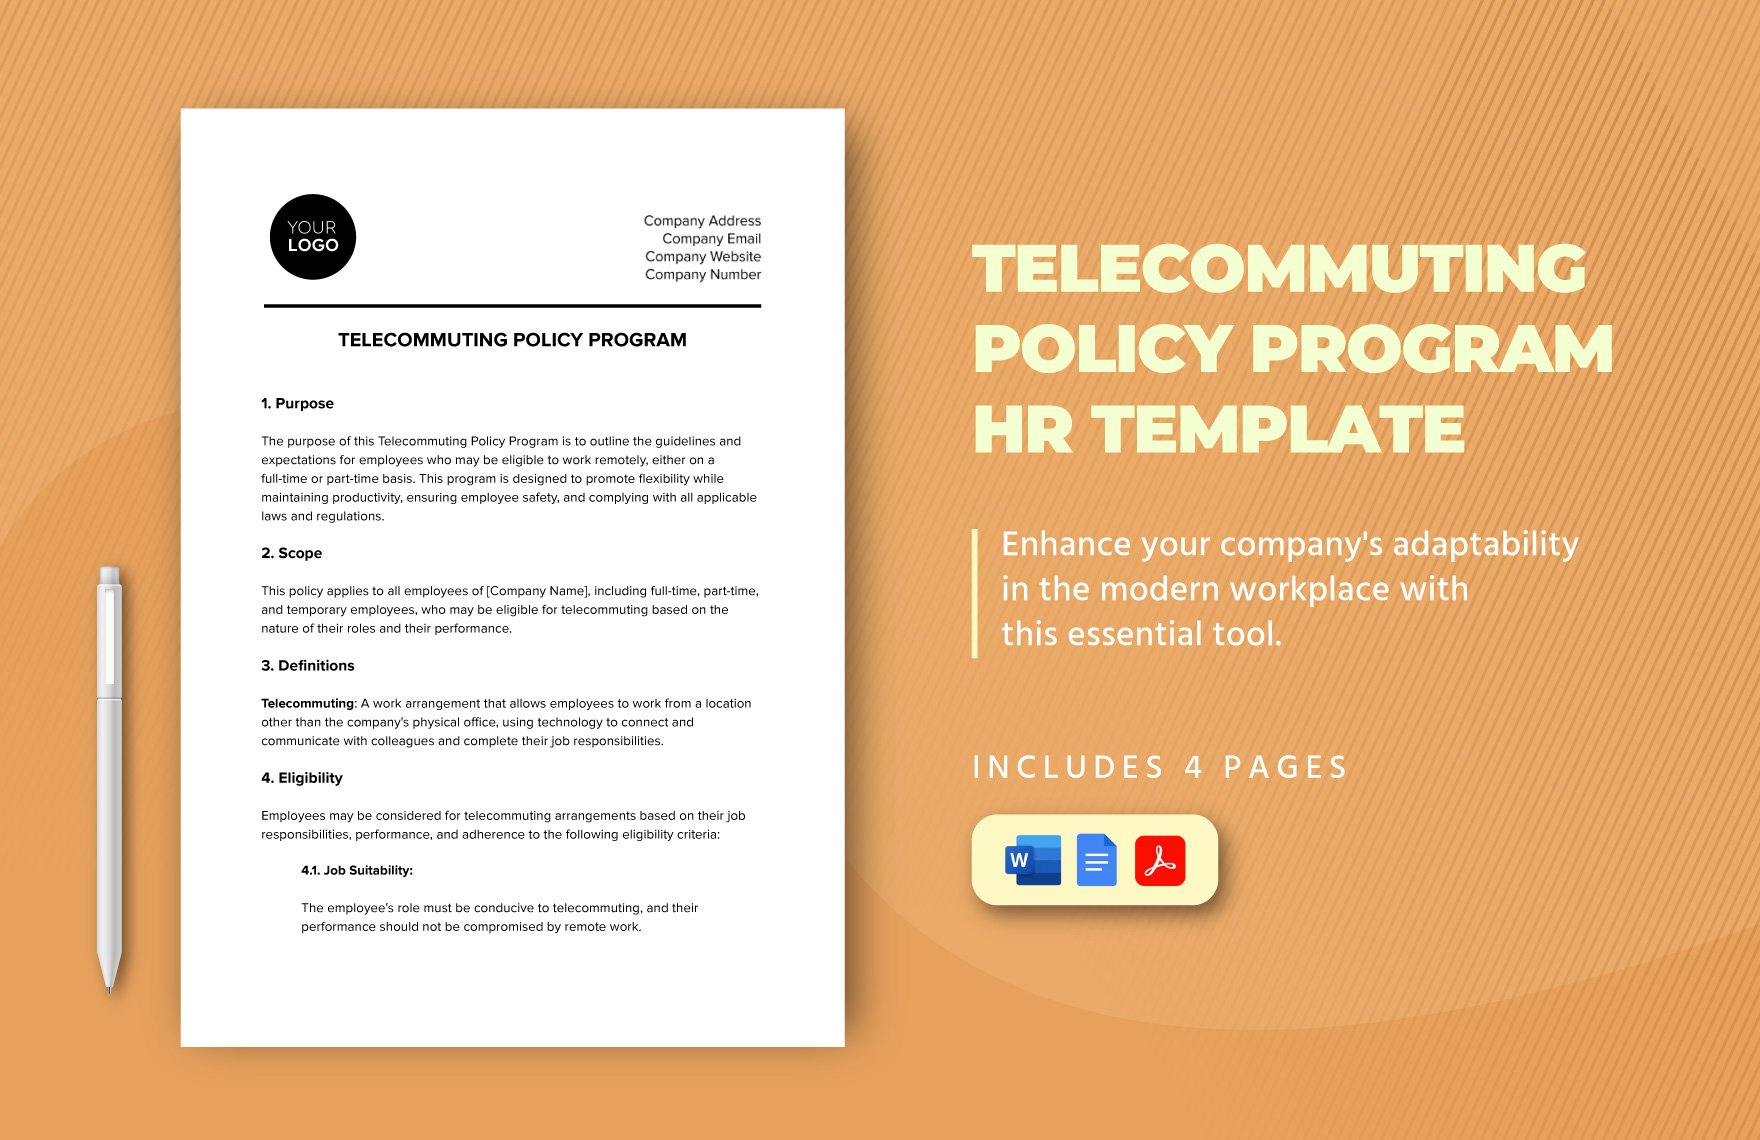 Telecommuting Policy Program HR Template